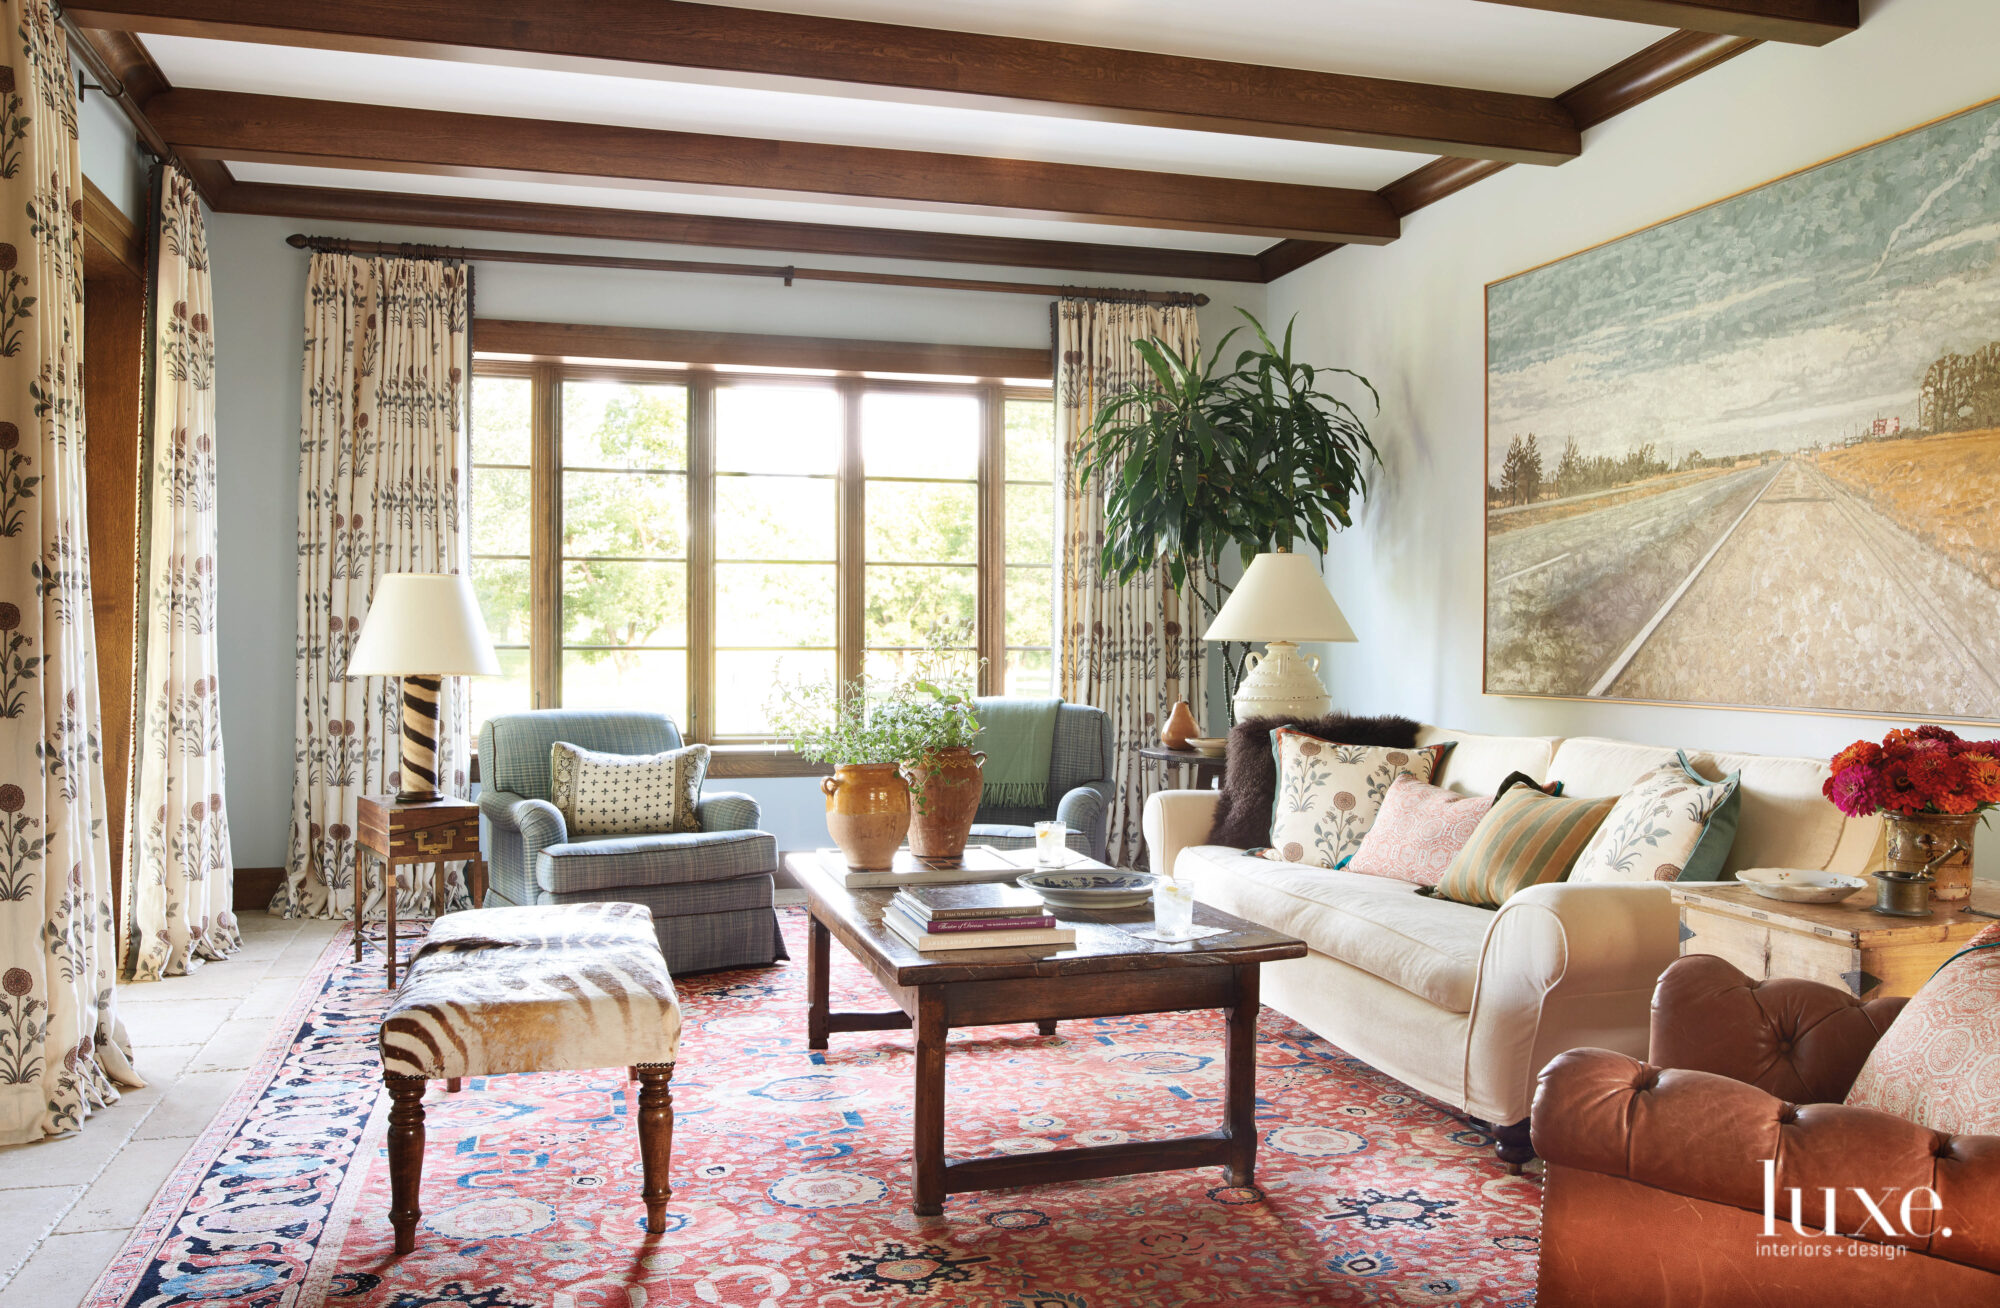 A living room has a vibrantly colored rug (mostly red) and vintage and new furniture pieces.